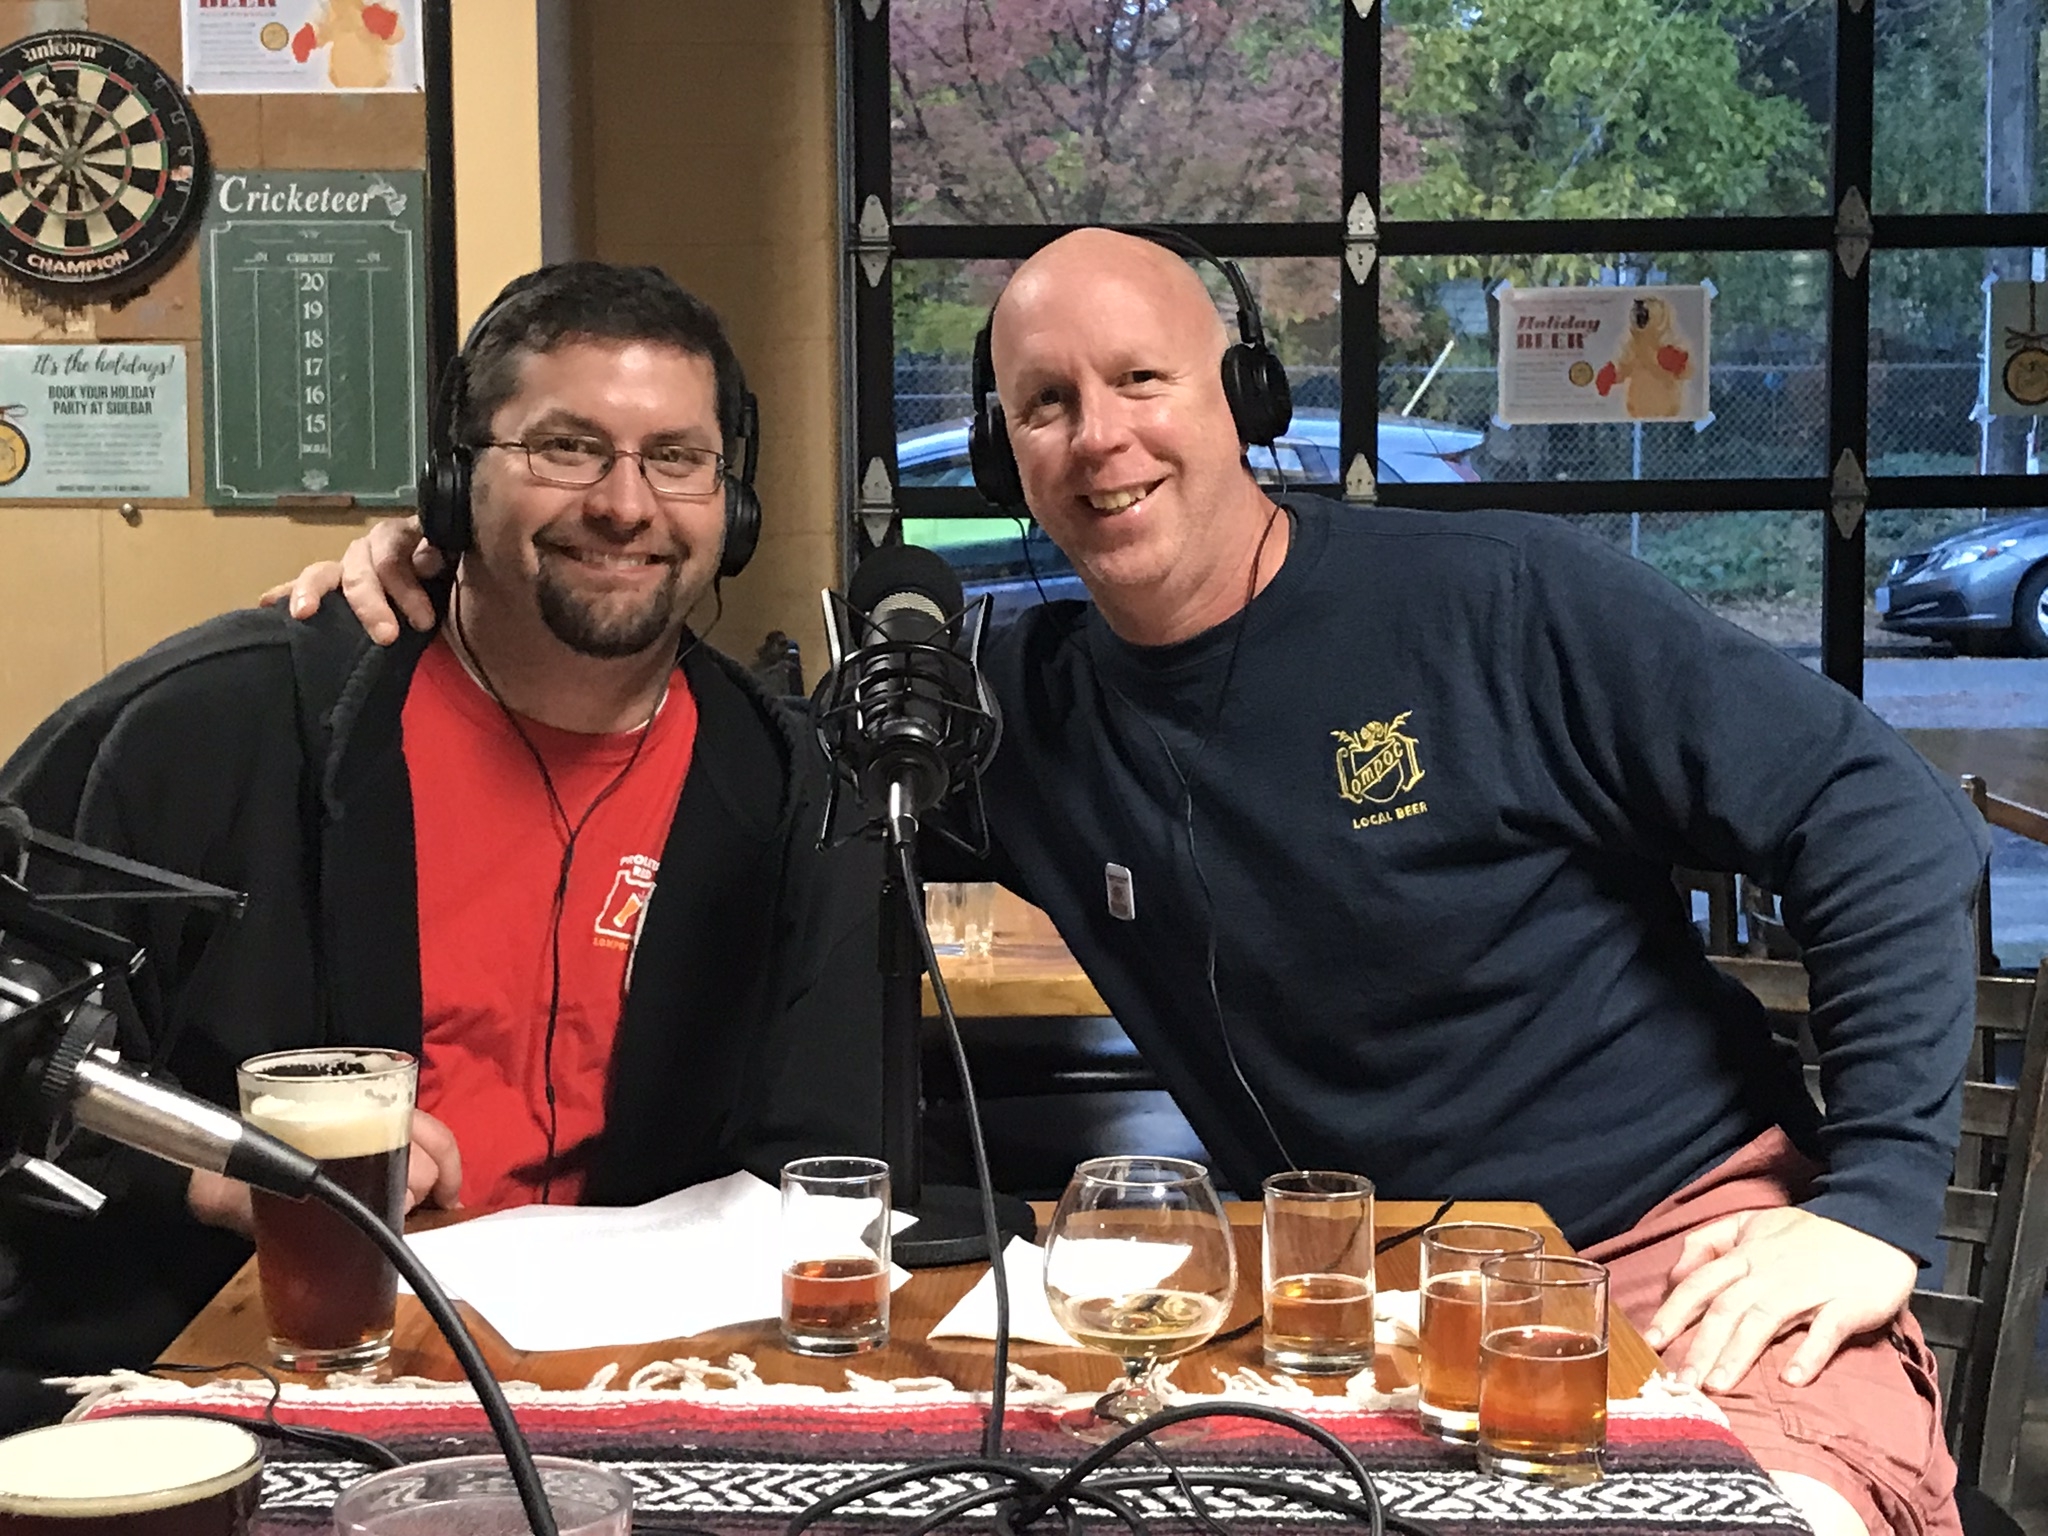 Lompoc Brewing’s Holiday Seasonal Beers for 2017 - Portland Beer Podcast Episode 51